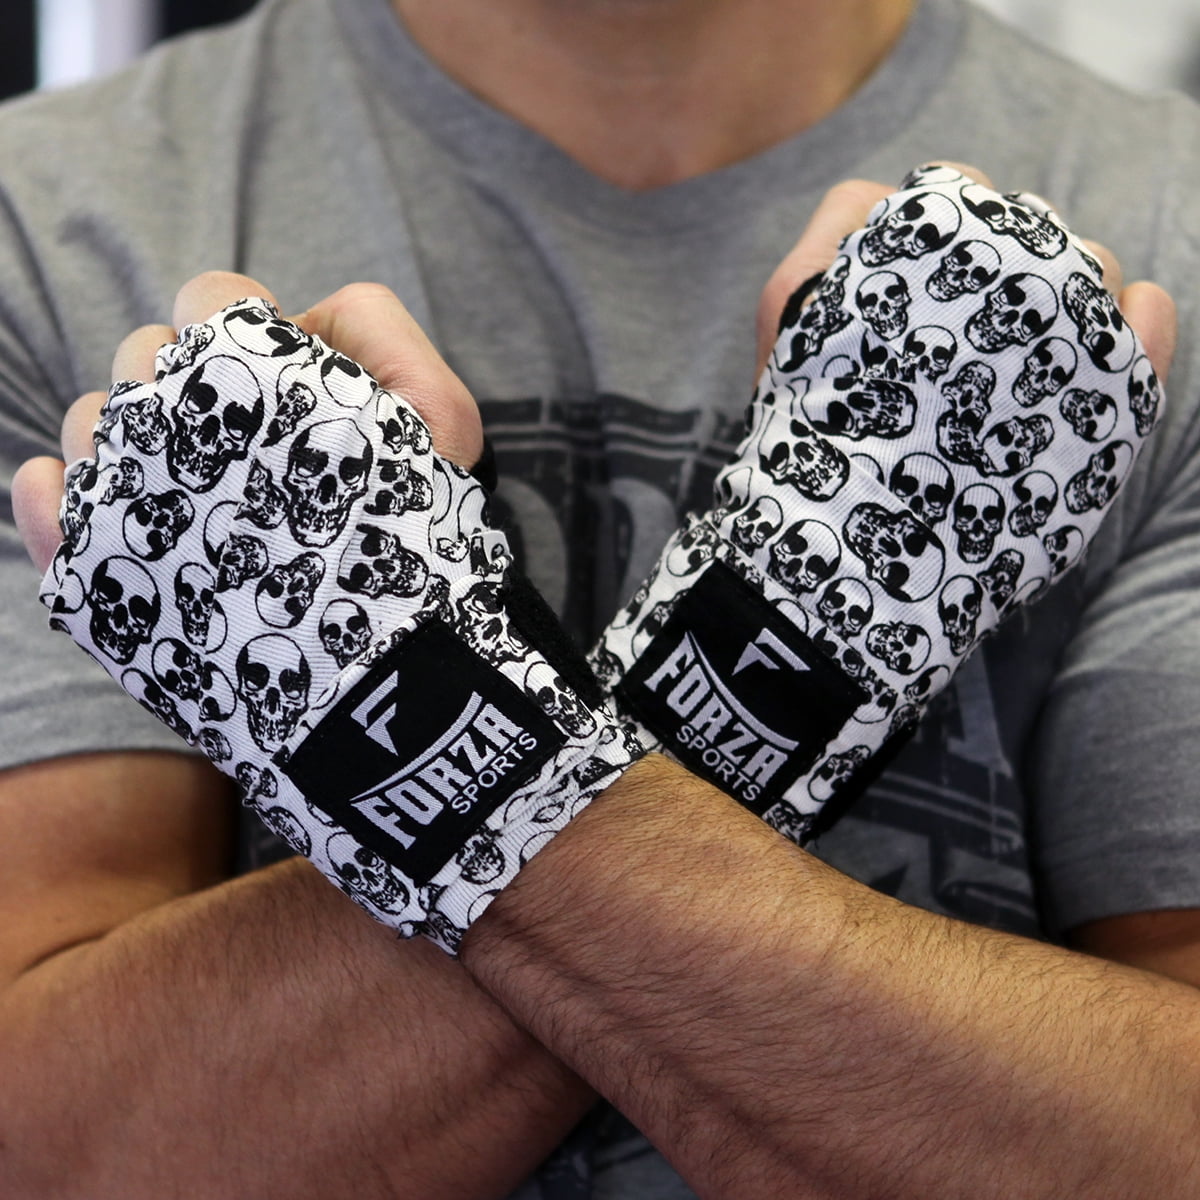 KTFO Purple Details about   Forza Sports 180" Mexican Style Boxing and MMA Handwraps 